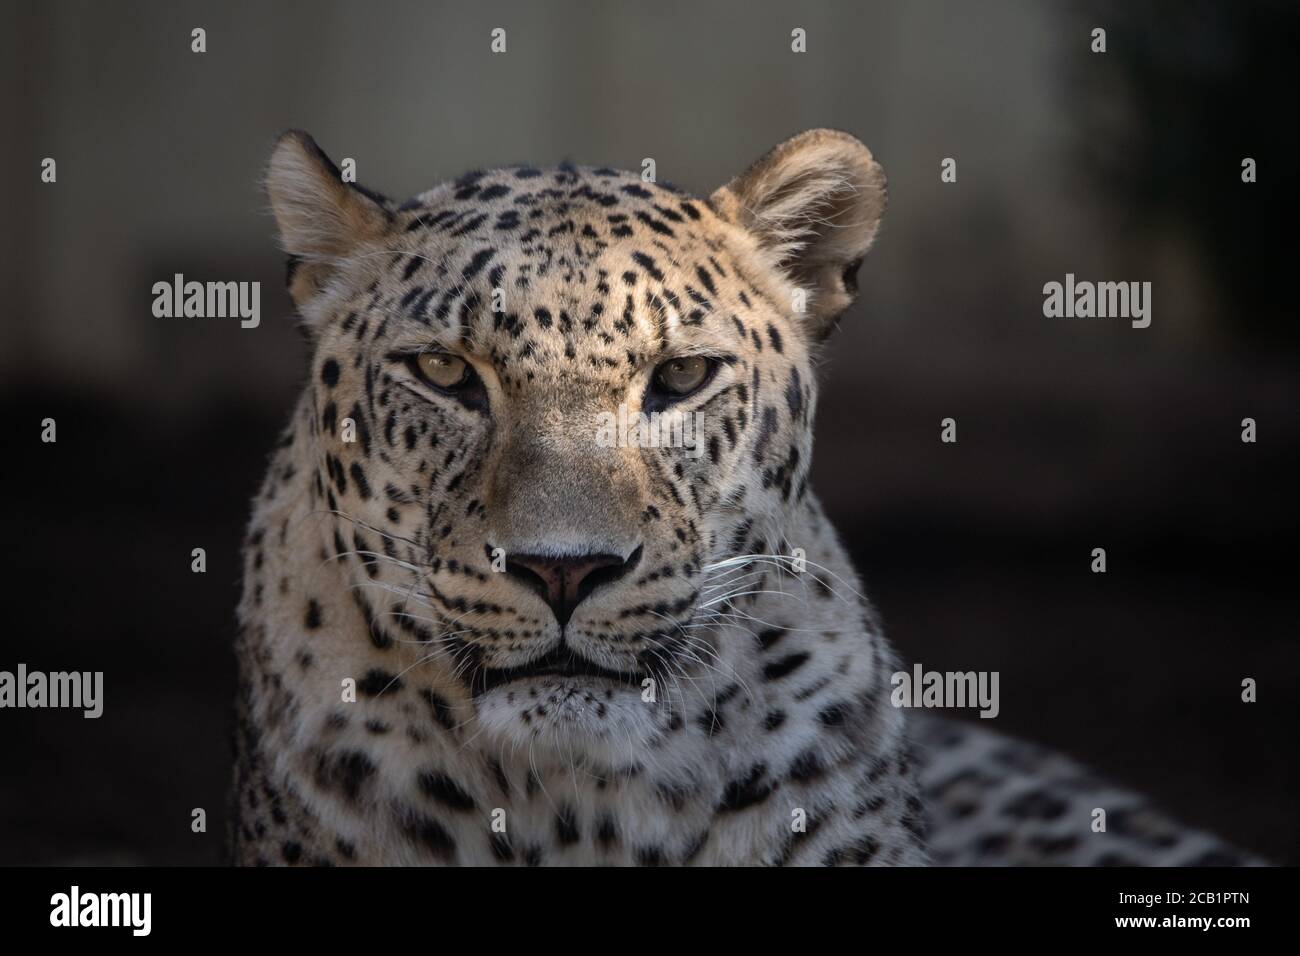 Close up facial portrait of a serene adult Asian leopard Stock Photo